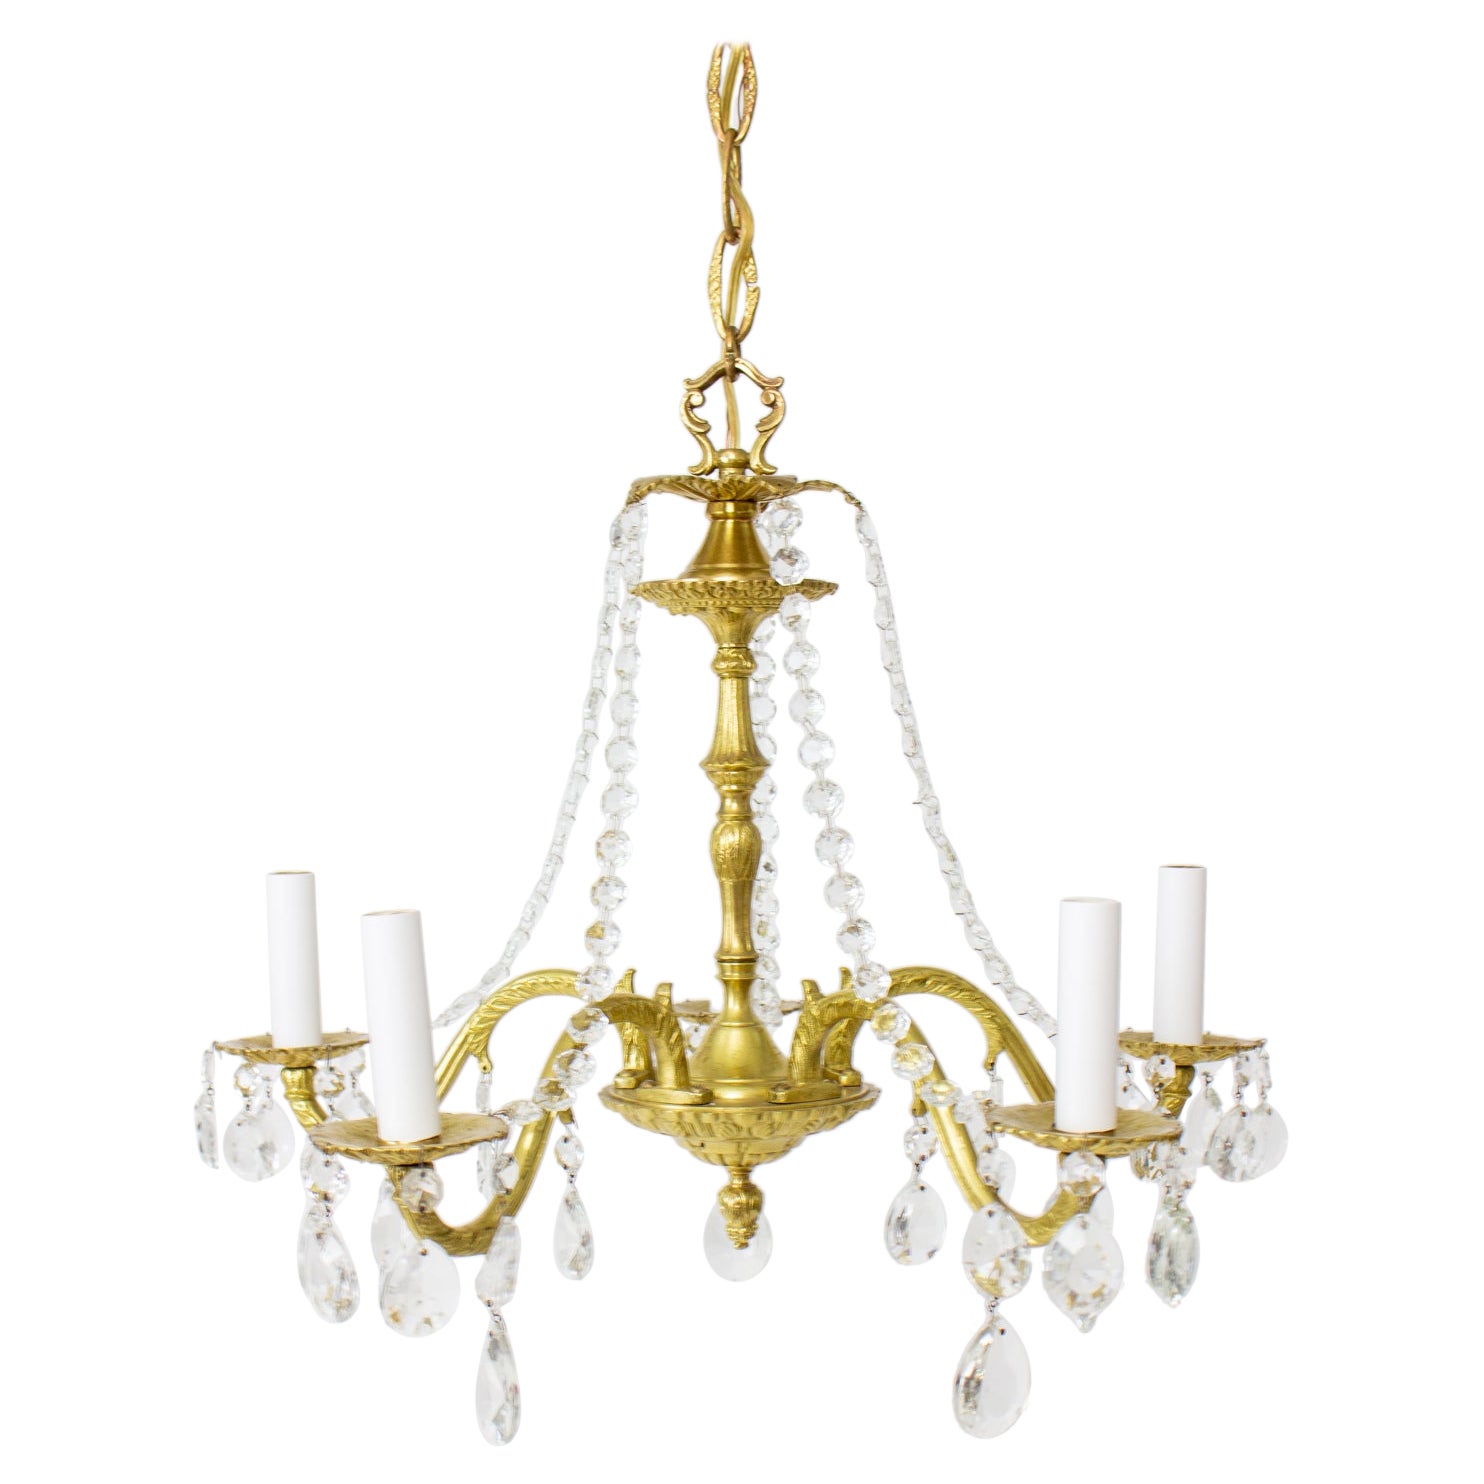 Mid-20th Century Five Arm Spanish Cast Brass and Crystal Chandelier For Sale